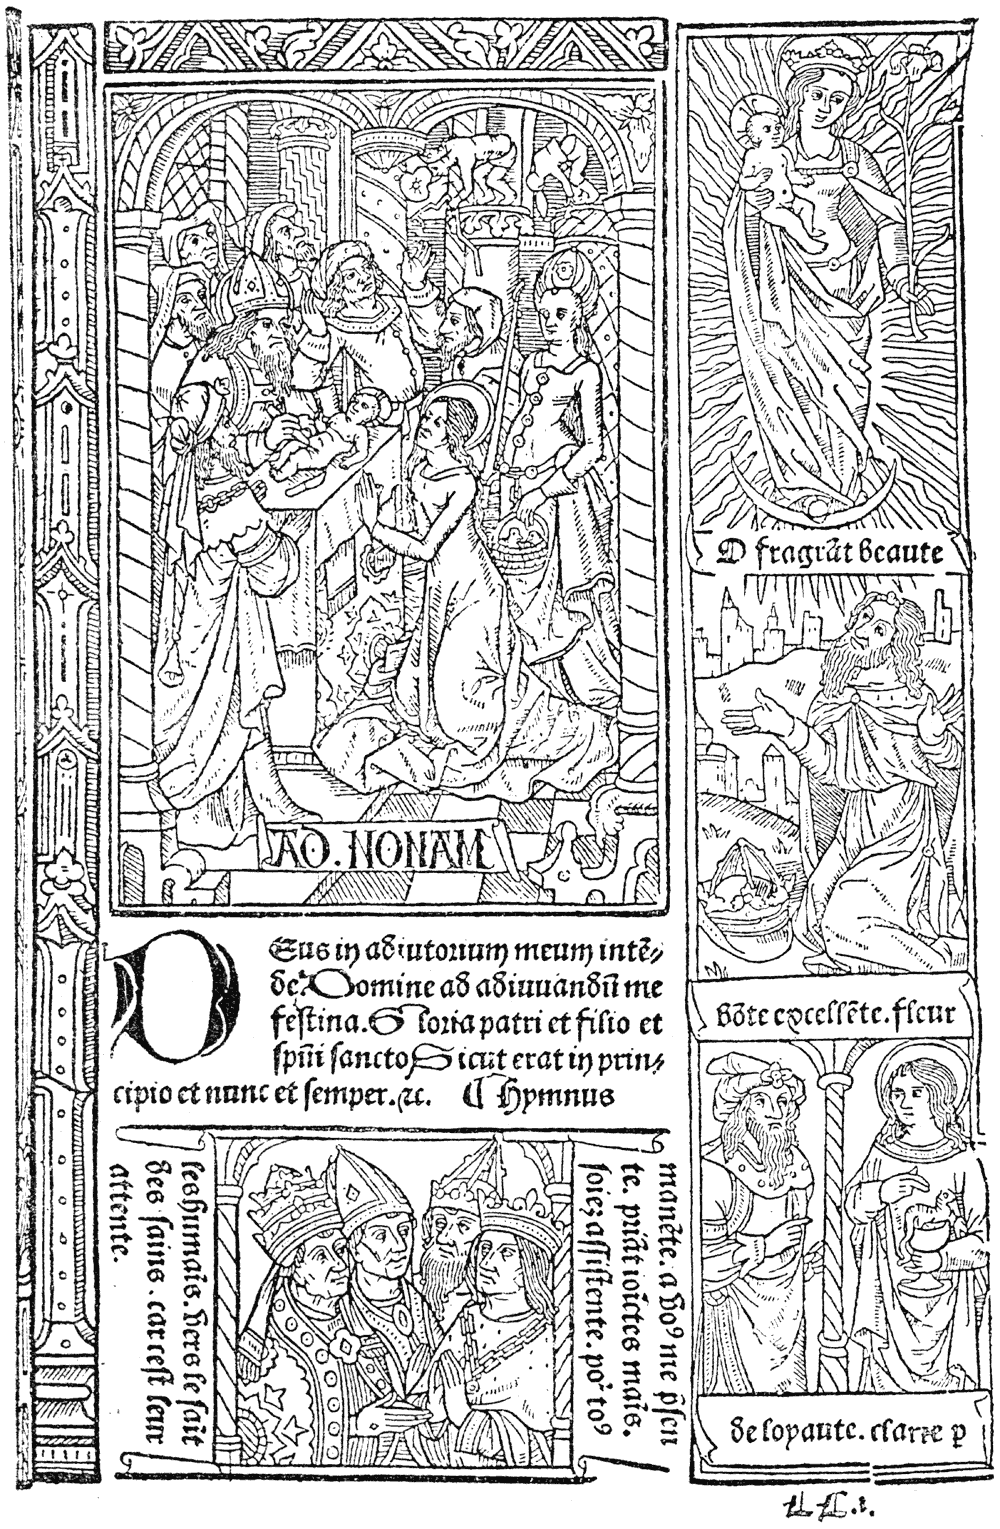 Page of the 'Grandes Heures' of Antony Verard : Paris, fifteenth century. From Henri Bouchot 'The Printed Book' (1887), page 81, published size in Bouchot 9cm wide by 14.1cm high.